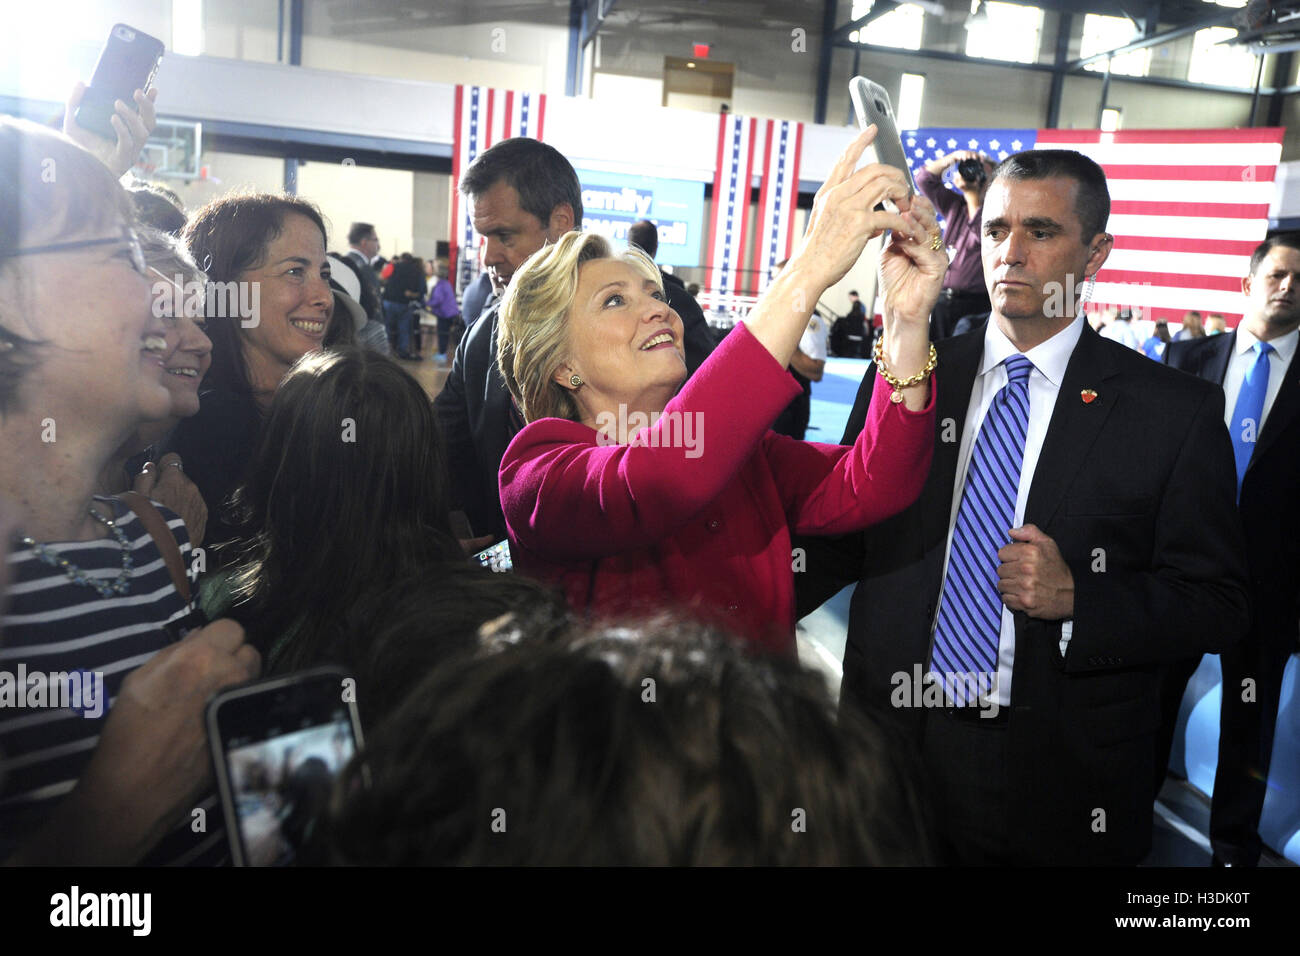 Haverford, USA. 4th Oct, 2016. Hillary Clinton greets supporters after a conversation with families about her agenda to support children and families and create an economy that works for everyone at Haverford Community Recreation & Environmental Center on October 4, 2016 in Haverford, USA. | Verwendung weltweit/picture alliance © dpa/Alamy Live News Stock Photo